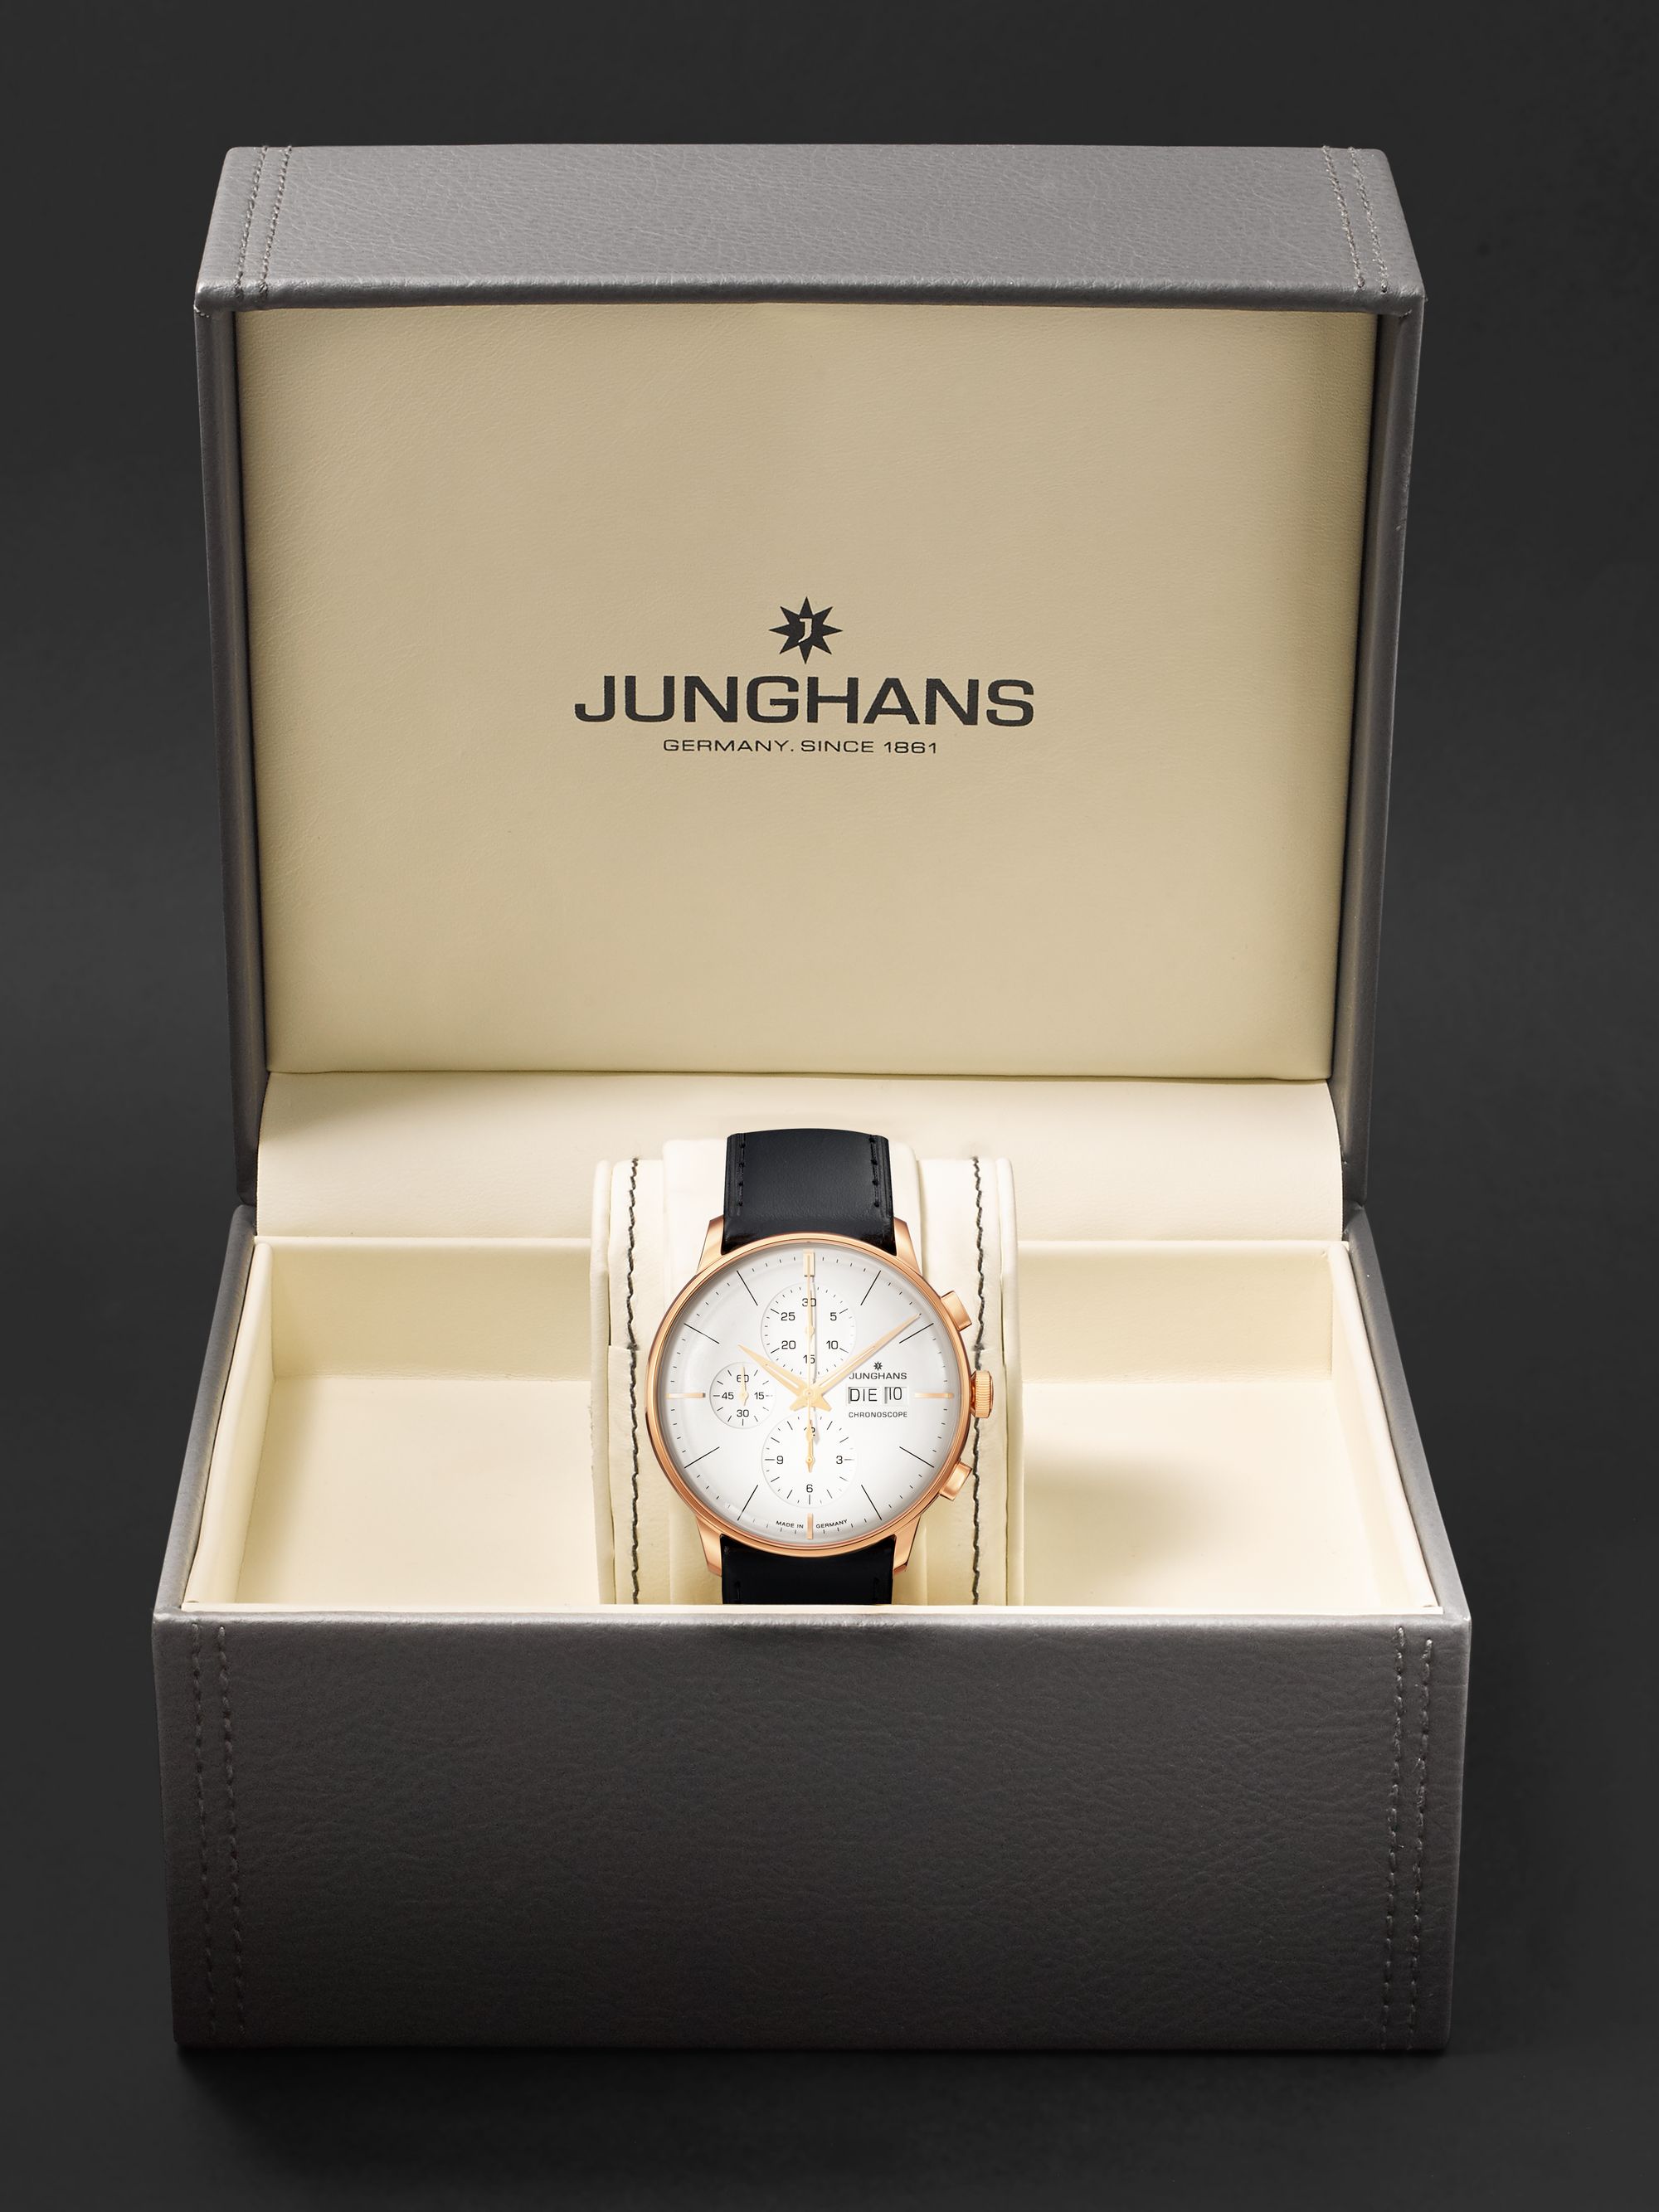 JUNGHANS Meister Chronoscope Automatic 40.7 mm PVD-Coated Stainless Steel and Leather Watch, 027/7023.03